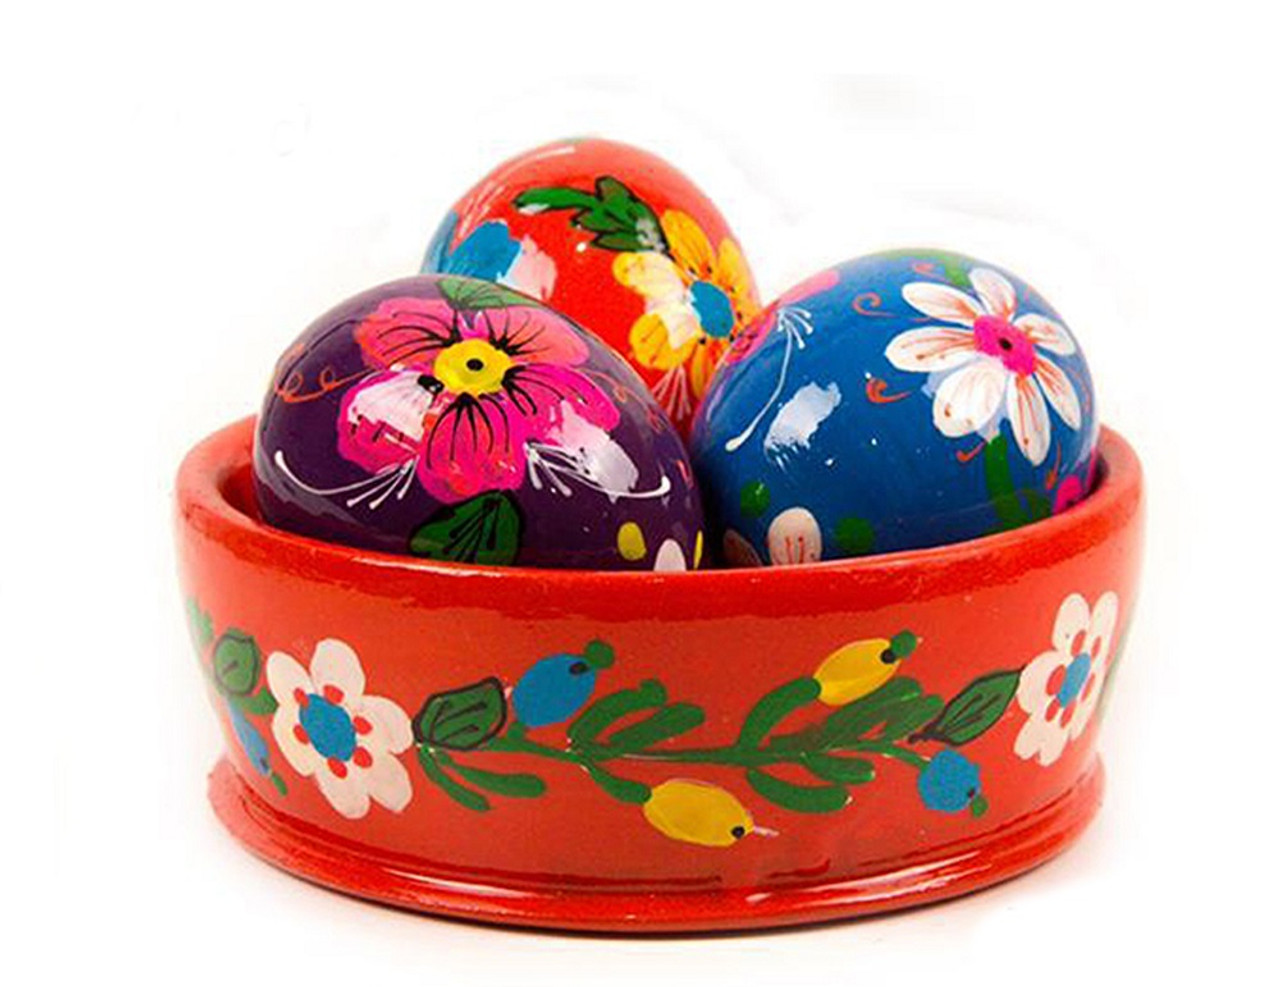 Wooden Eggs, red bowl of three, floral design